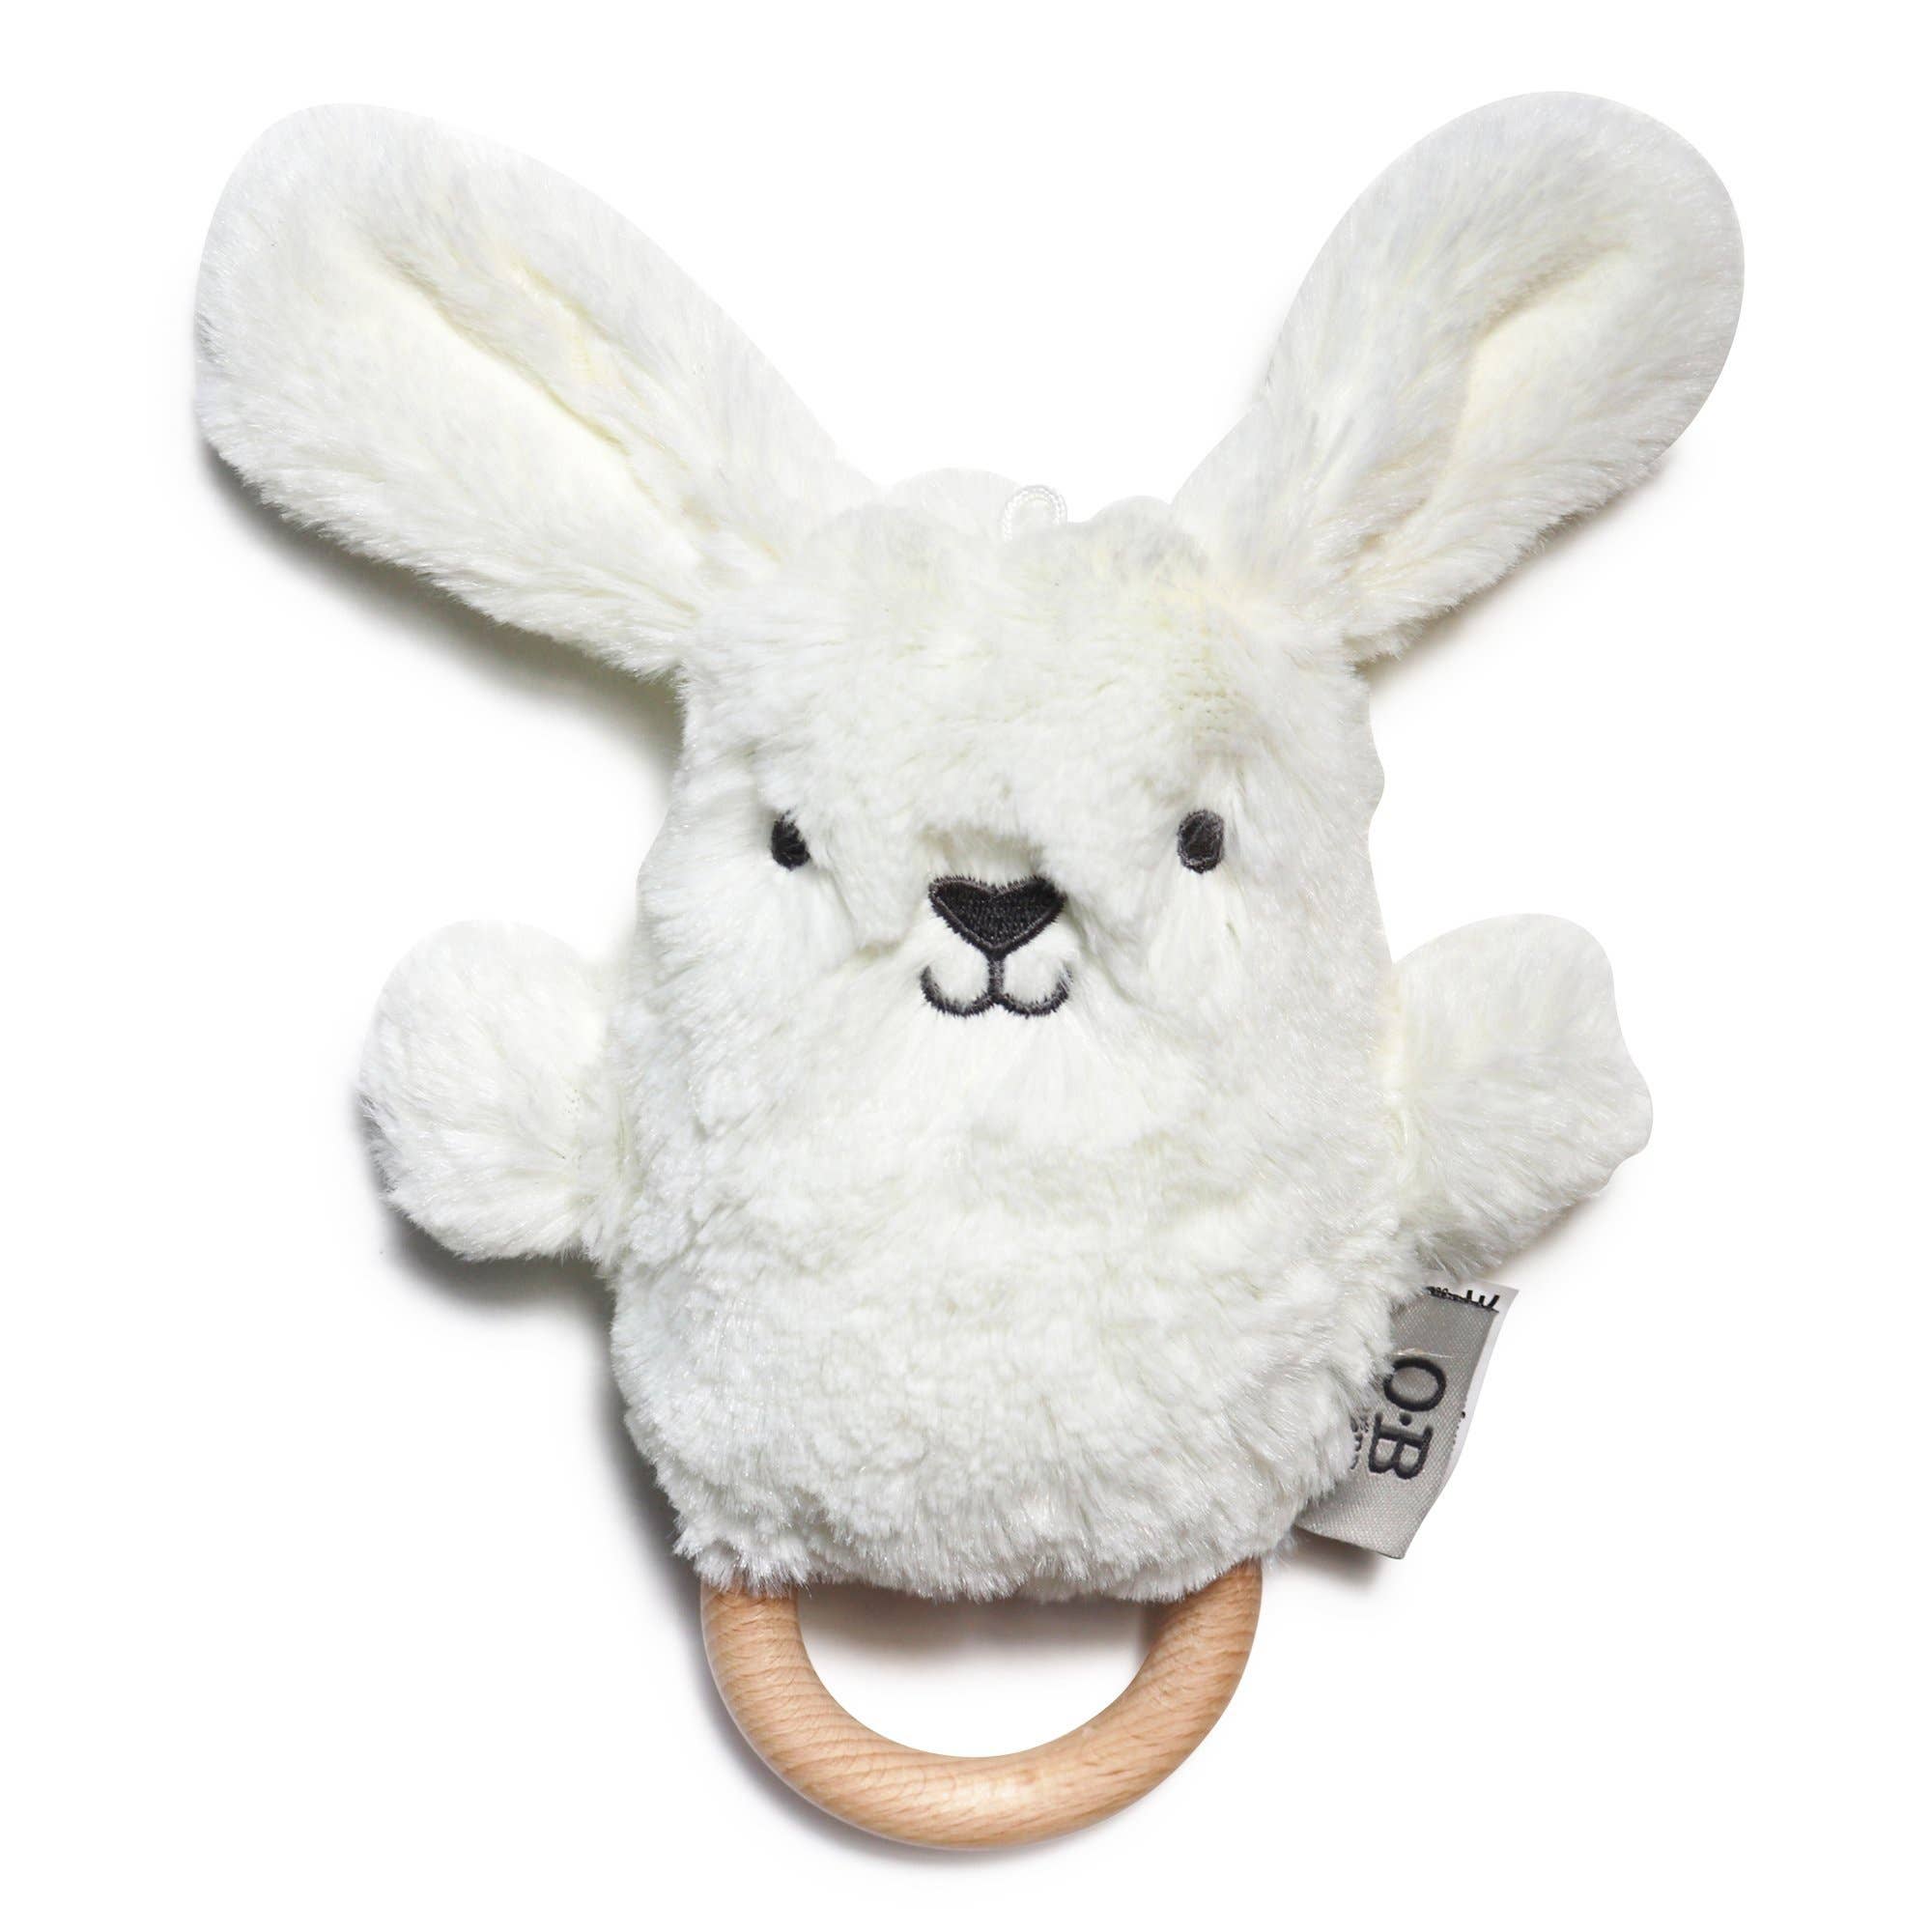 Snow Bunny Soft Rattle Toy